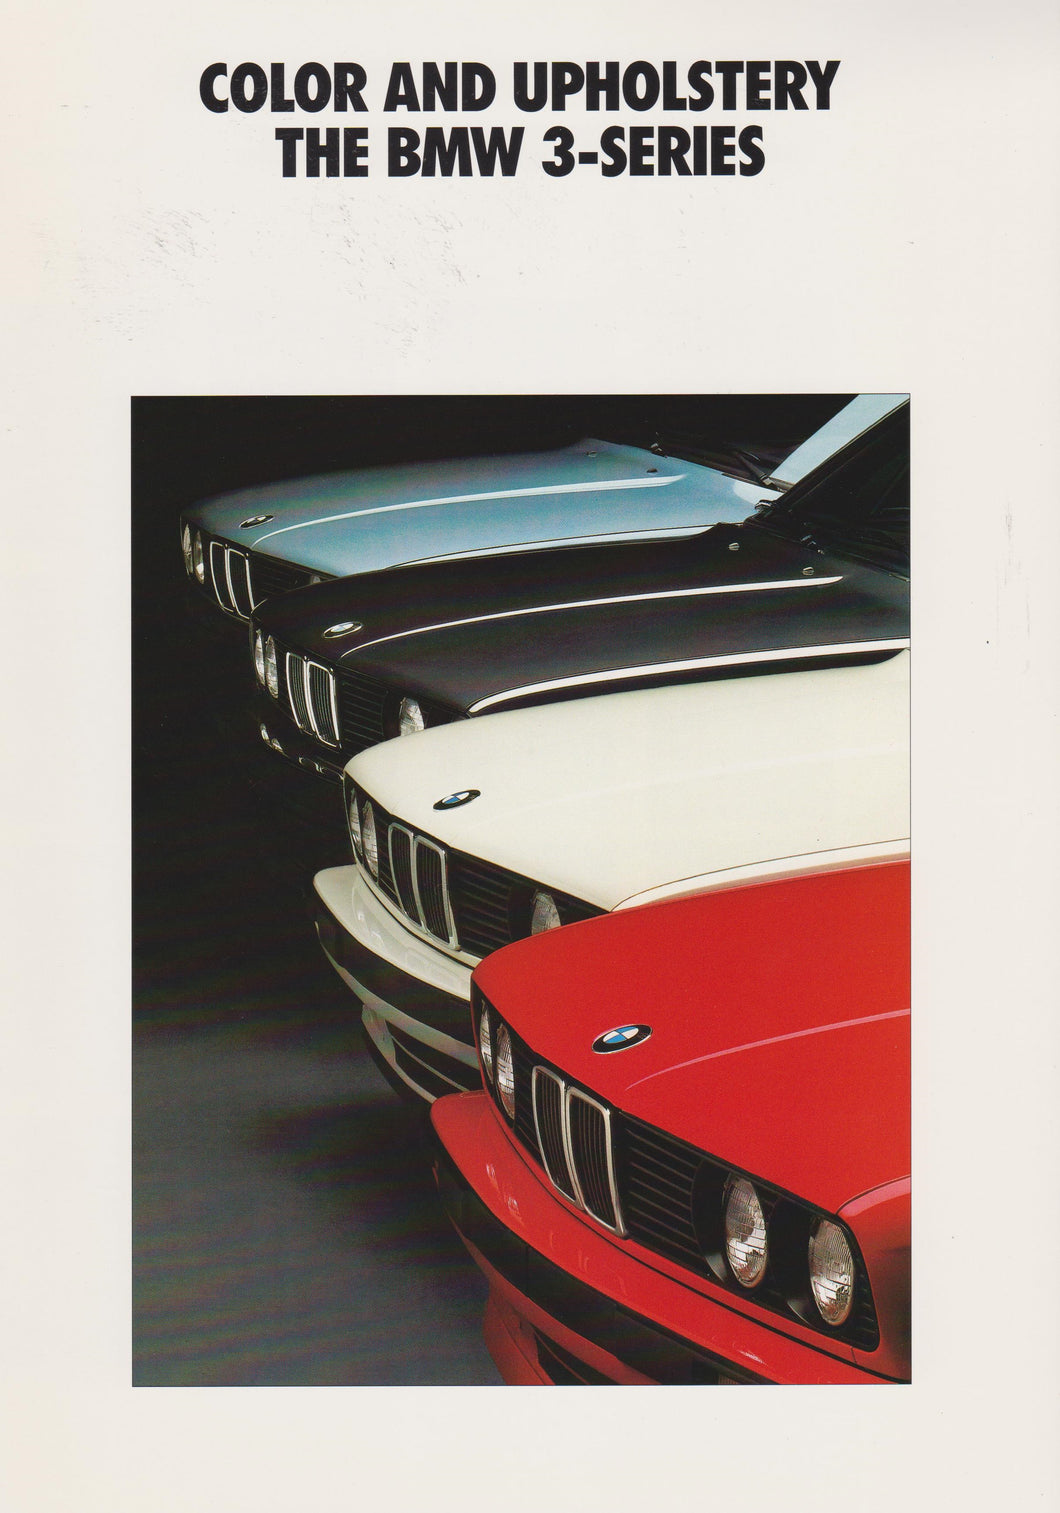 Brochure - Color and Upholstery The BMW 3-Series (1991)